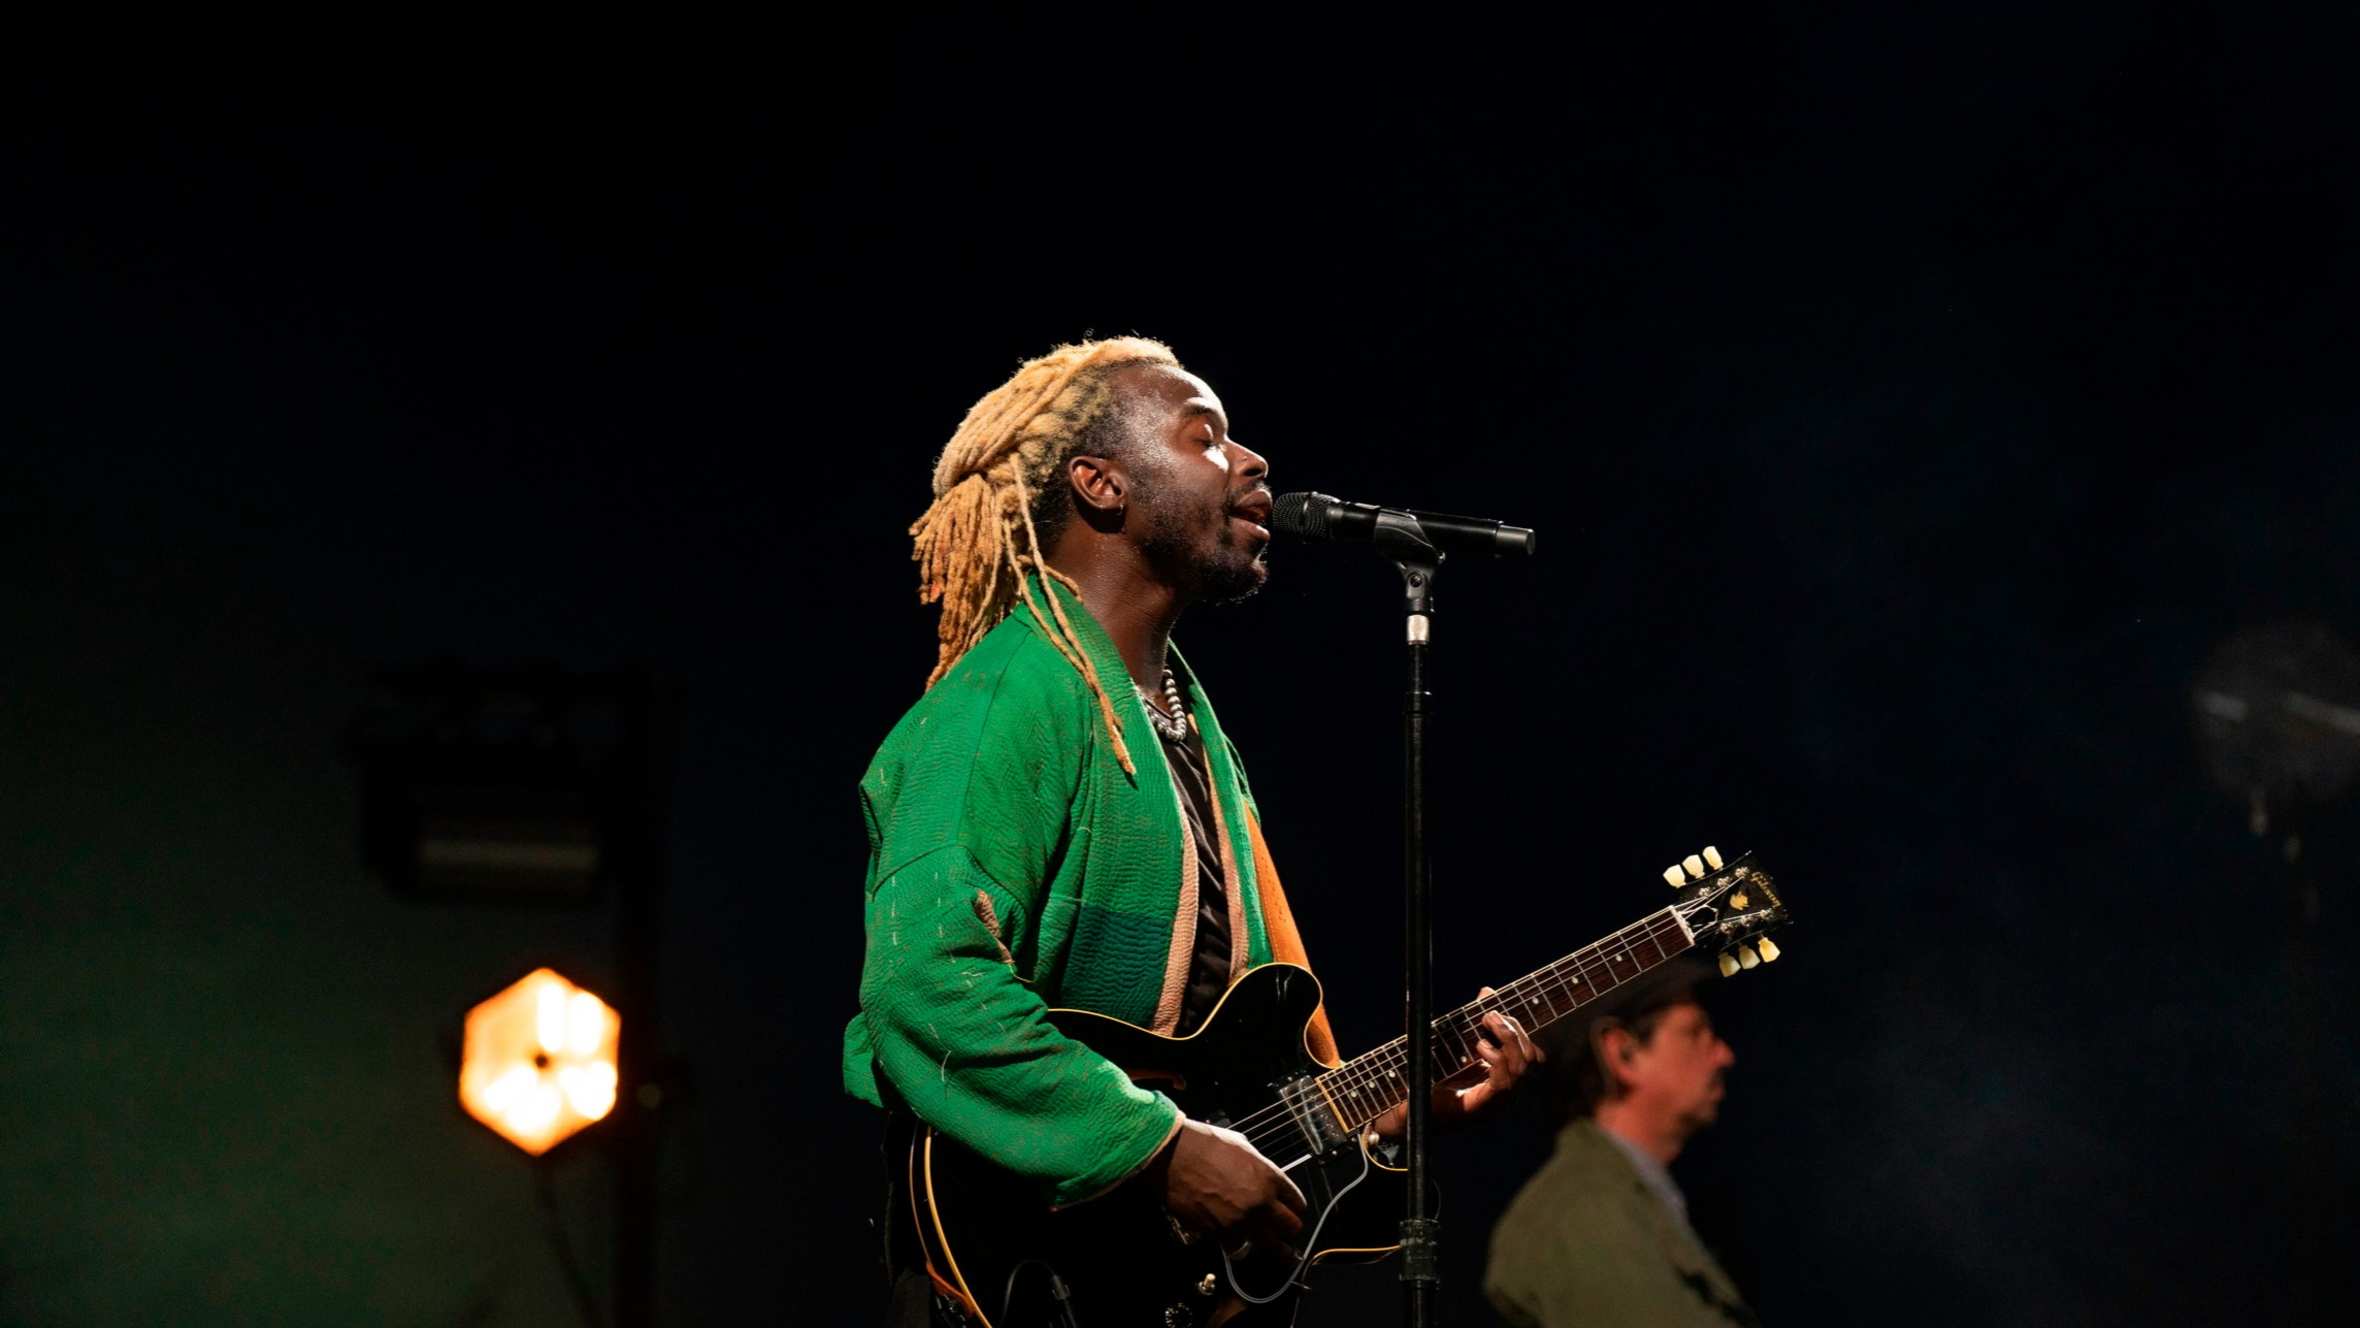 A man with blond locs and wearing a bright green jacket plays an electric guitar on stage while singing into microphone with his eyes closed